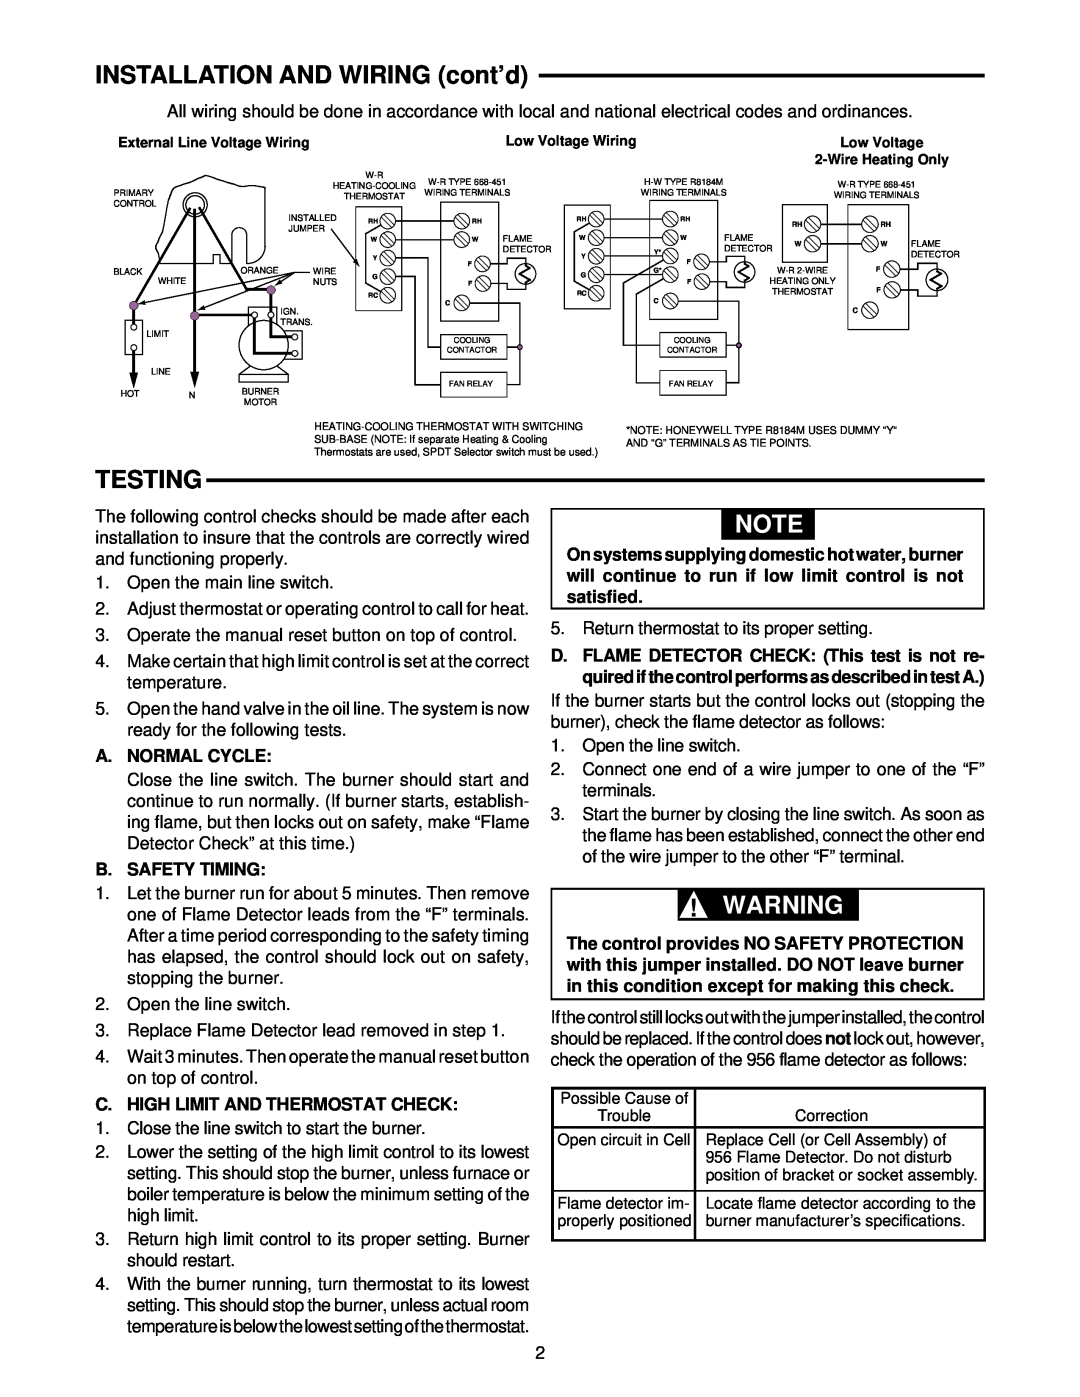 White Rodgers 668-451 installation instructions INSTALLATION AND WIRING cont’d, Testing, A.Normal Cycle, B.Safety Timing 